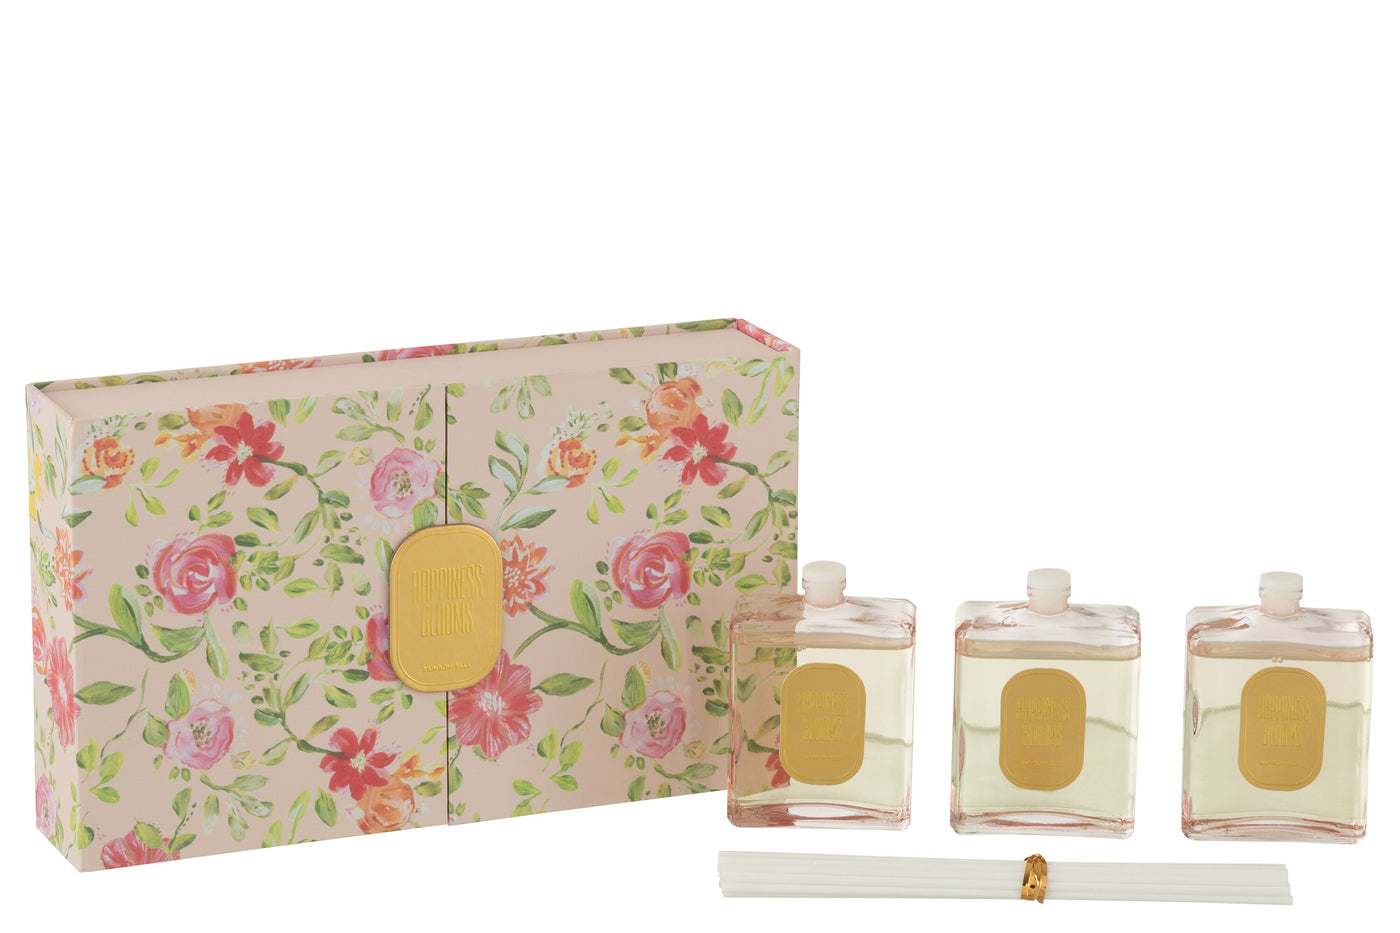 BOX 3 SCENTED OIL HAPPINESS BLOOMS RAIN REEF PINK